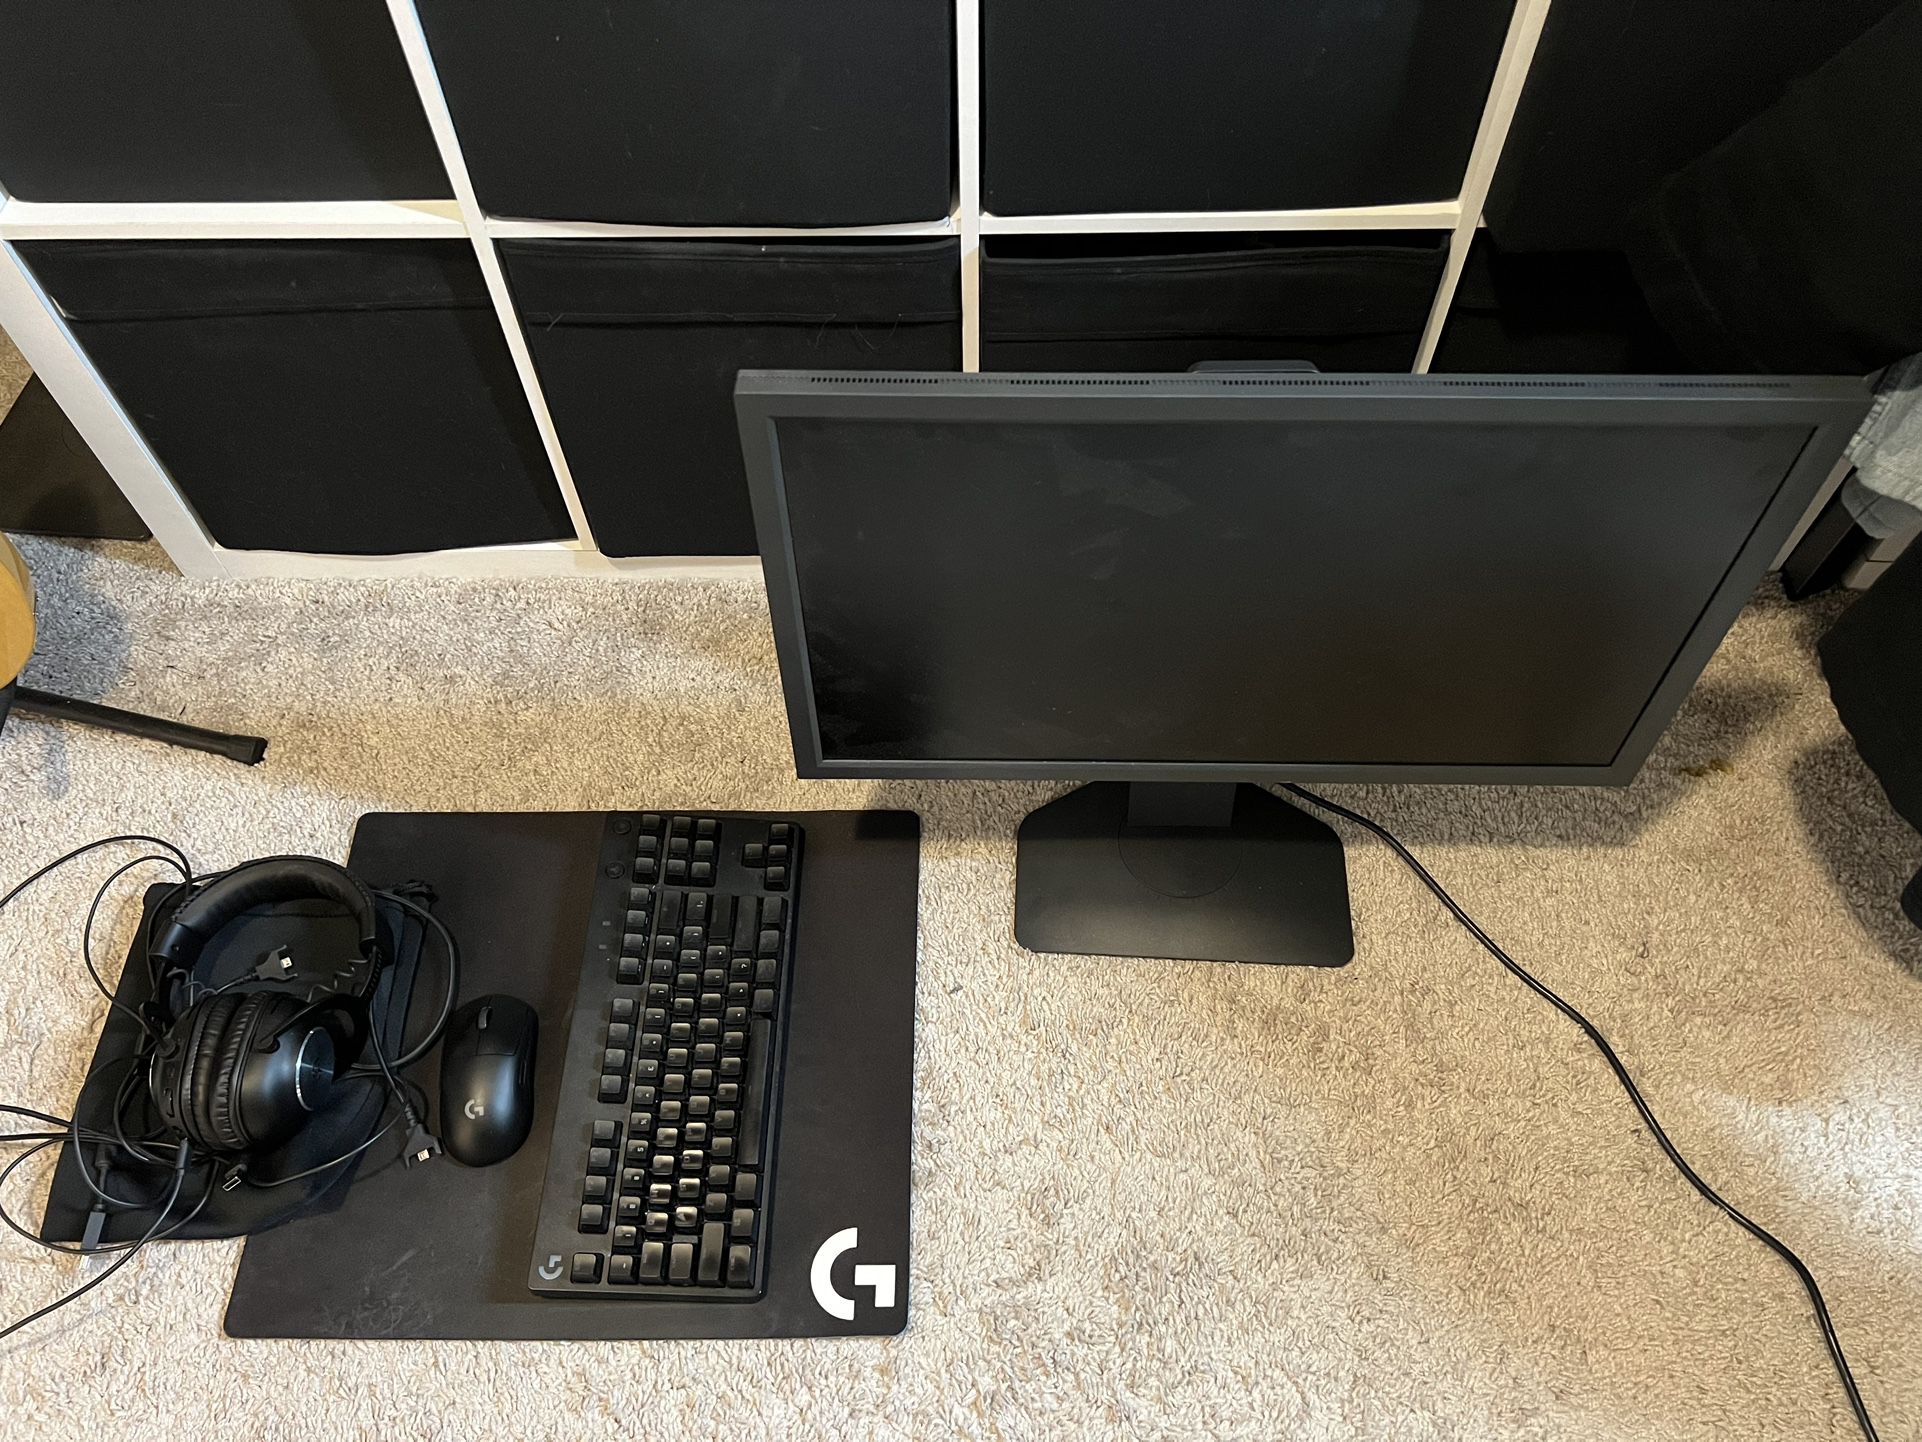 FPS Gaming Peripherals Zowie BenQ Zowie Logitech Mouse Keyboard Headset Monitor